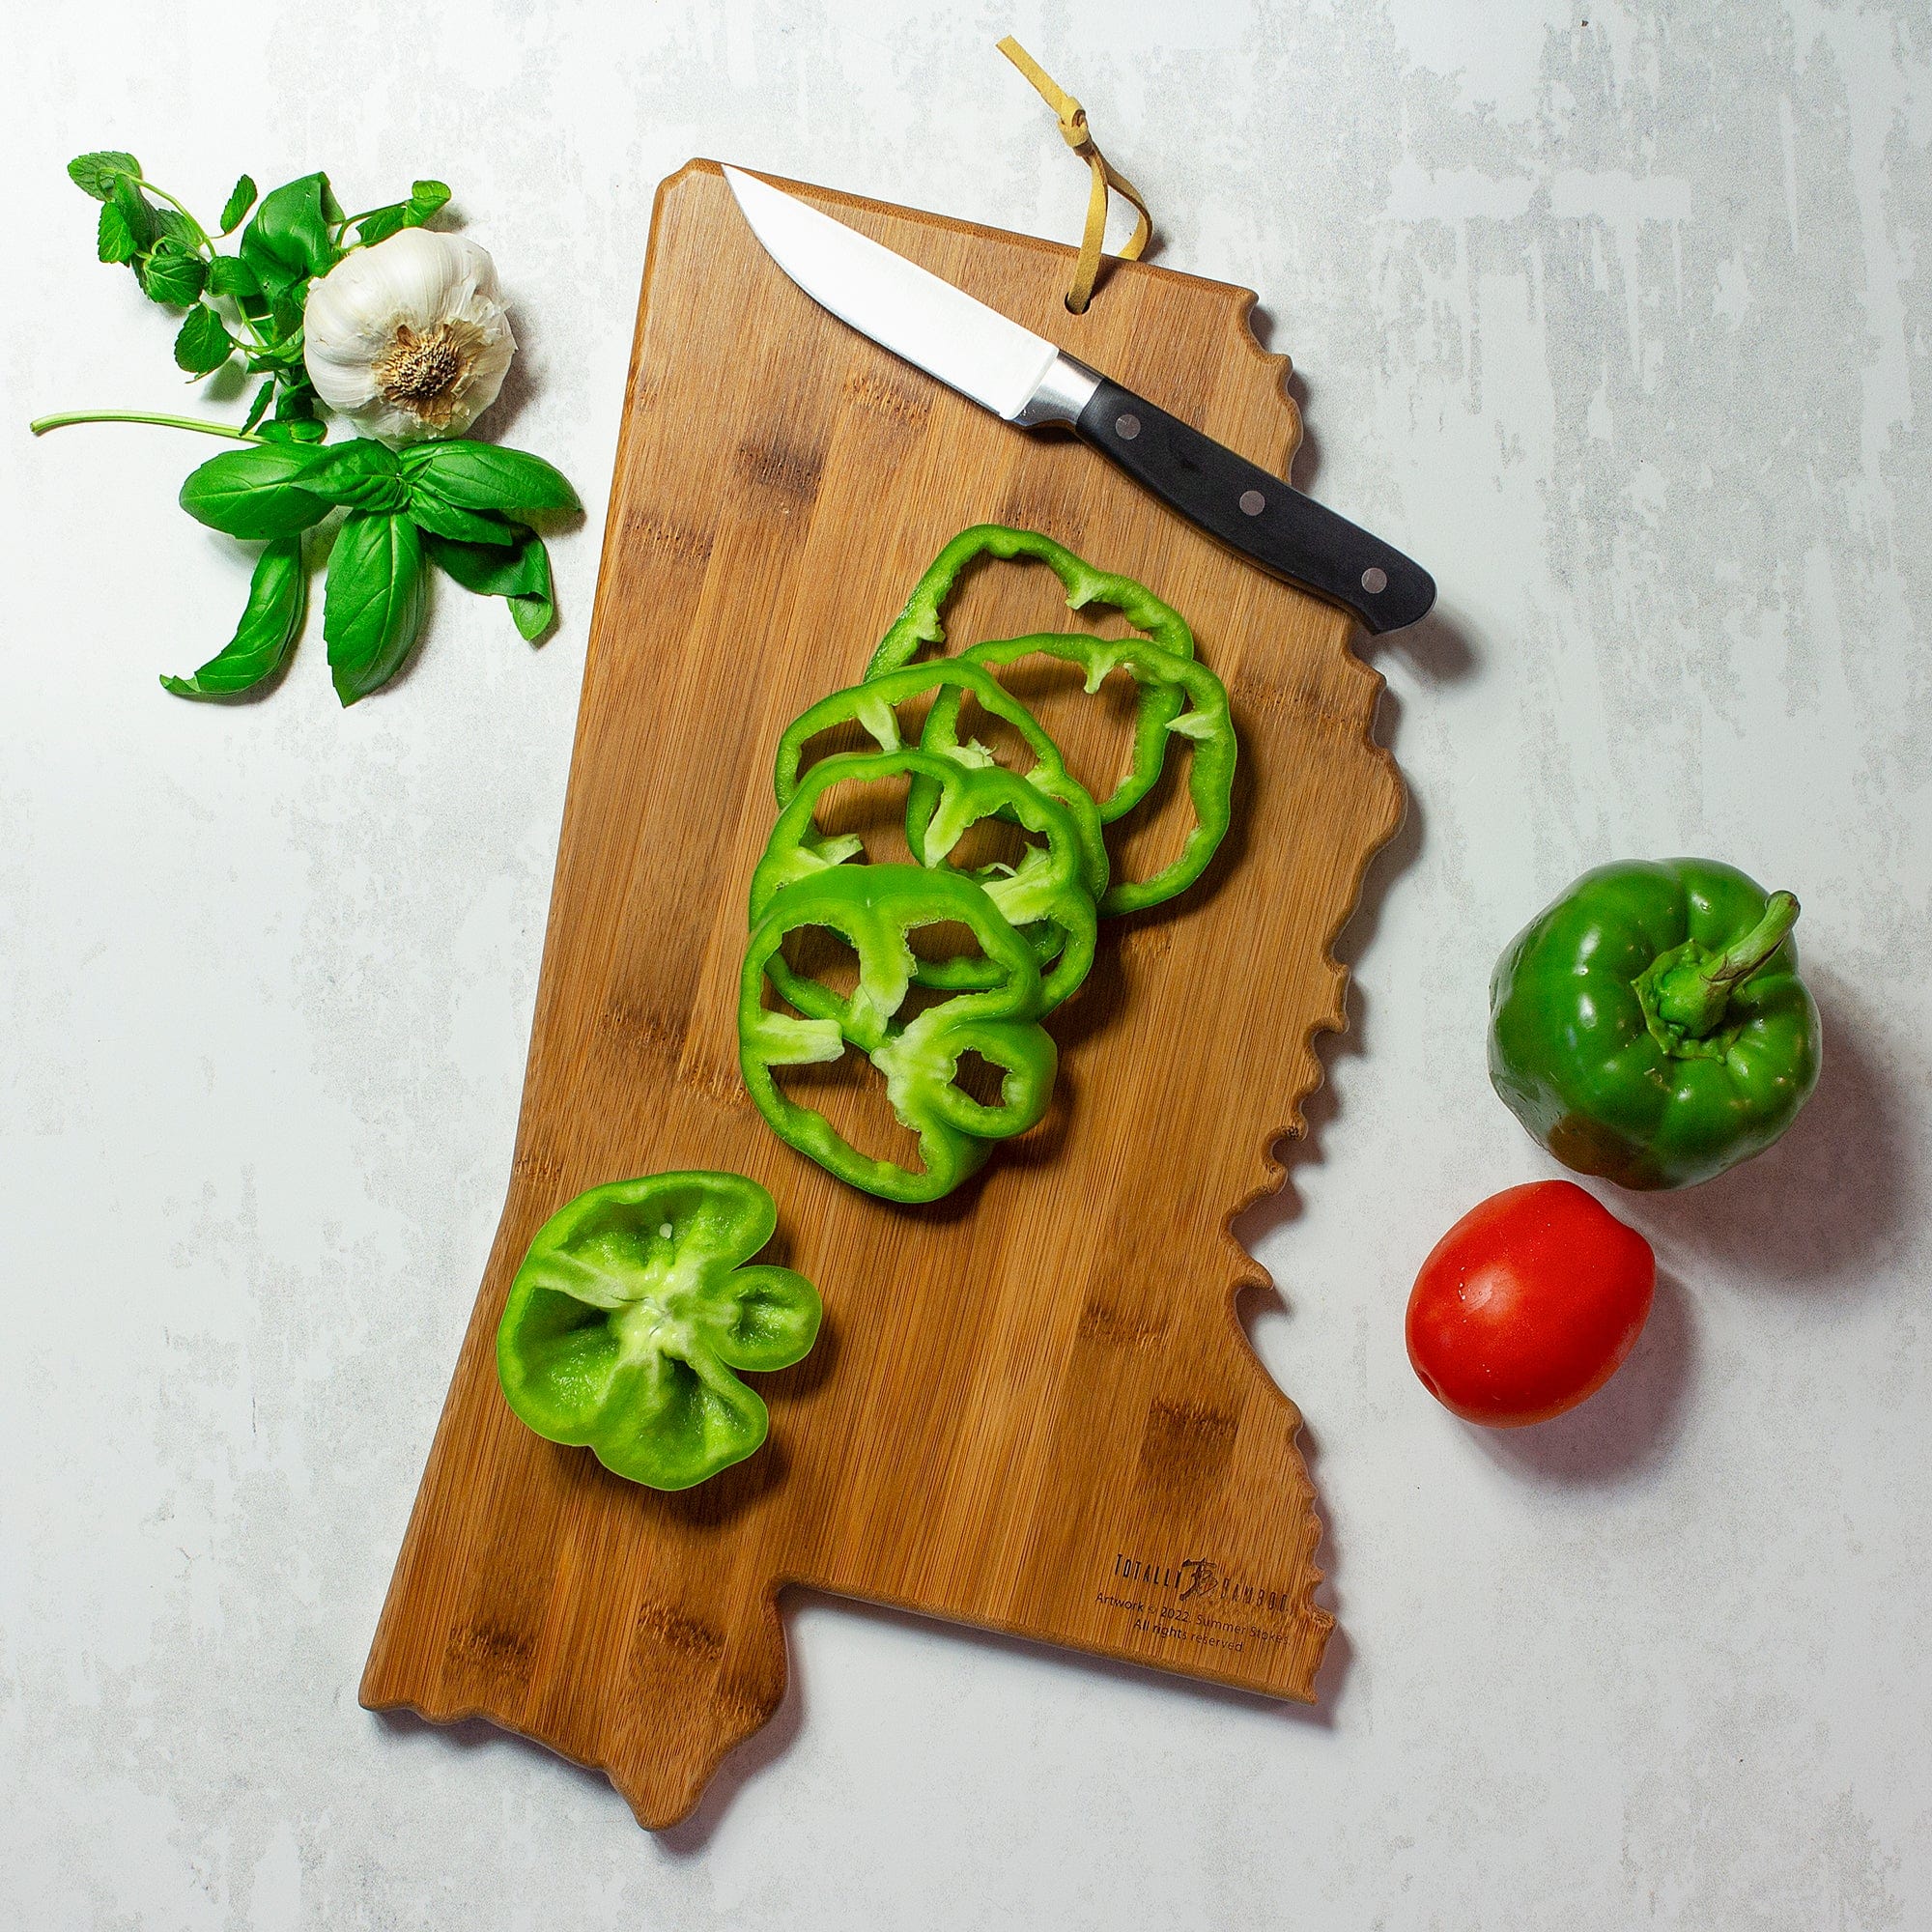 Totally Bamboo Mississippi State Shaped Serving and Cutting Board with Artwork by Summer Stokes